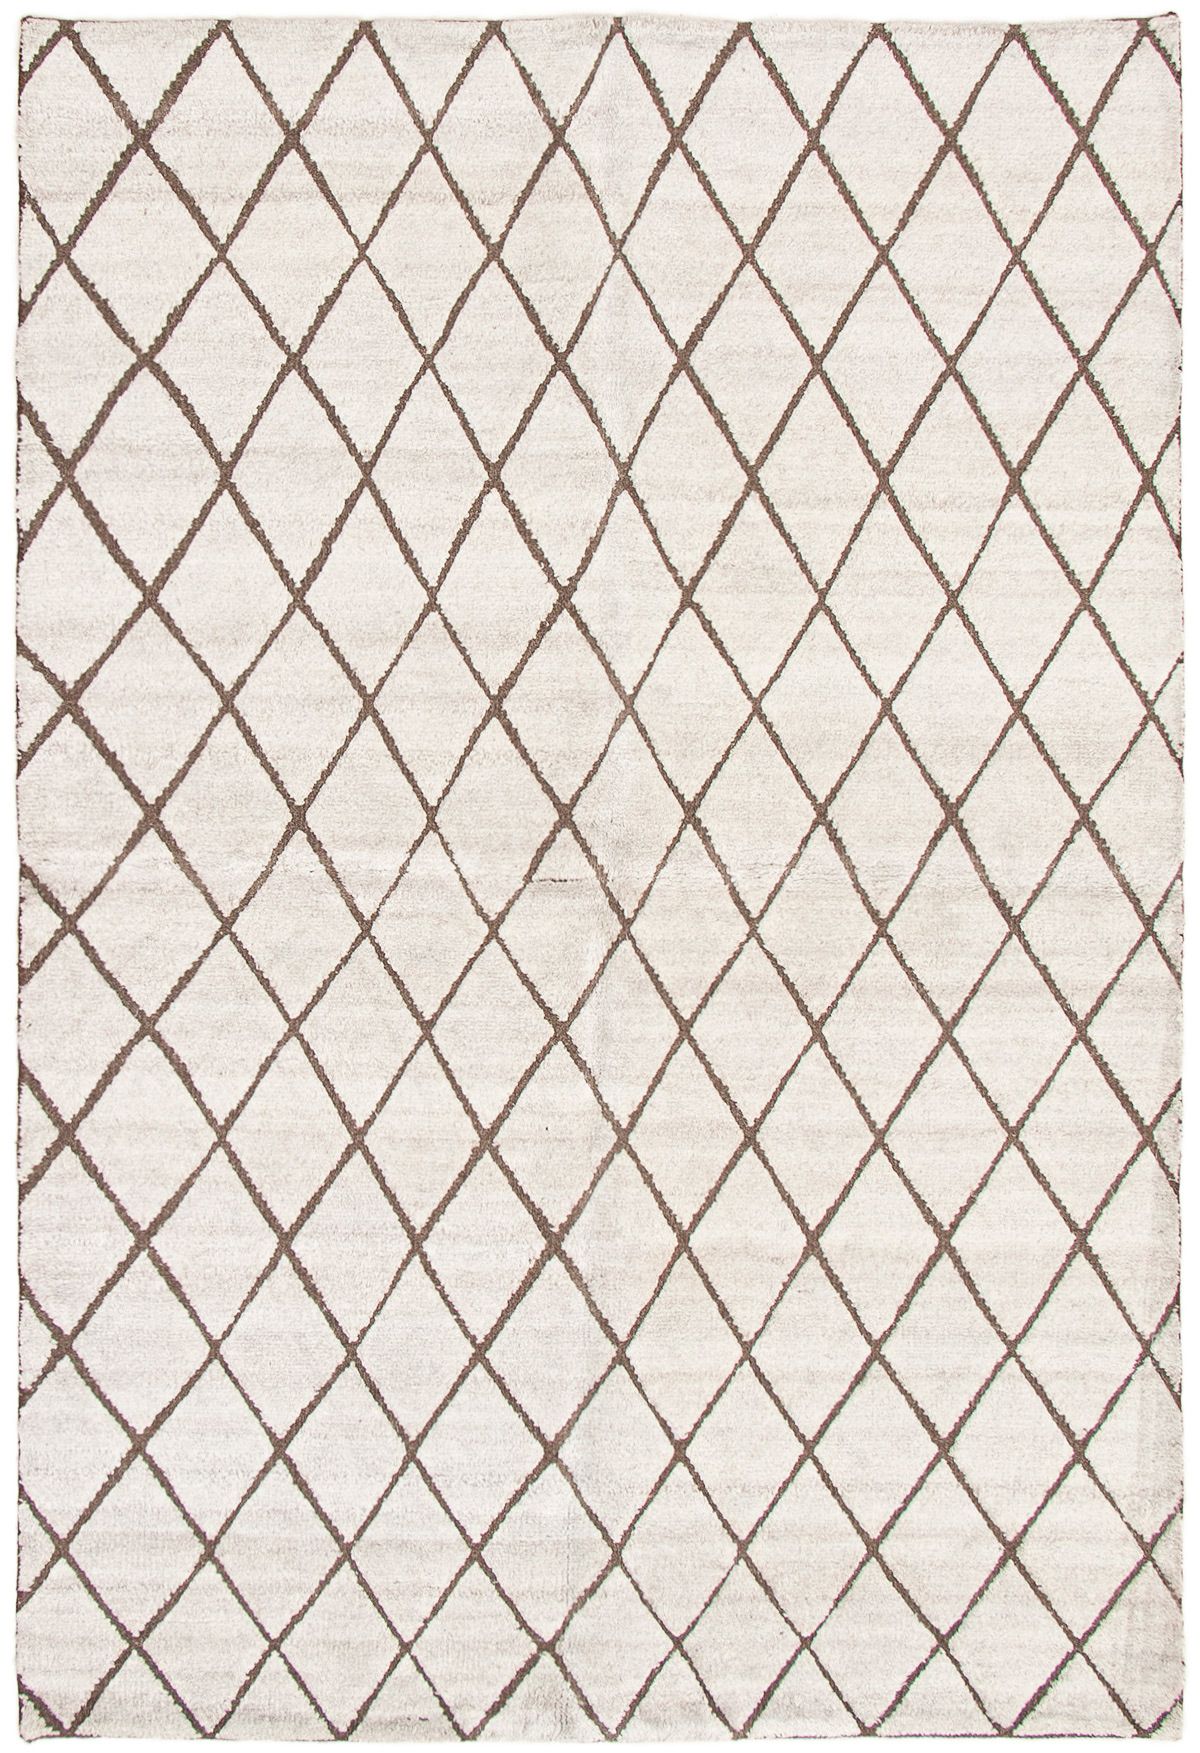 Hand-knotted Arlequin Light Grey Wool Rug 6'0" x 9'1" Size: 6'0" x 9'1"  